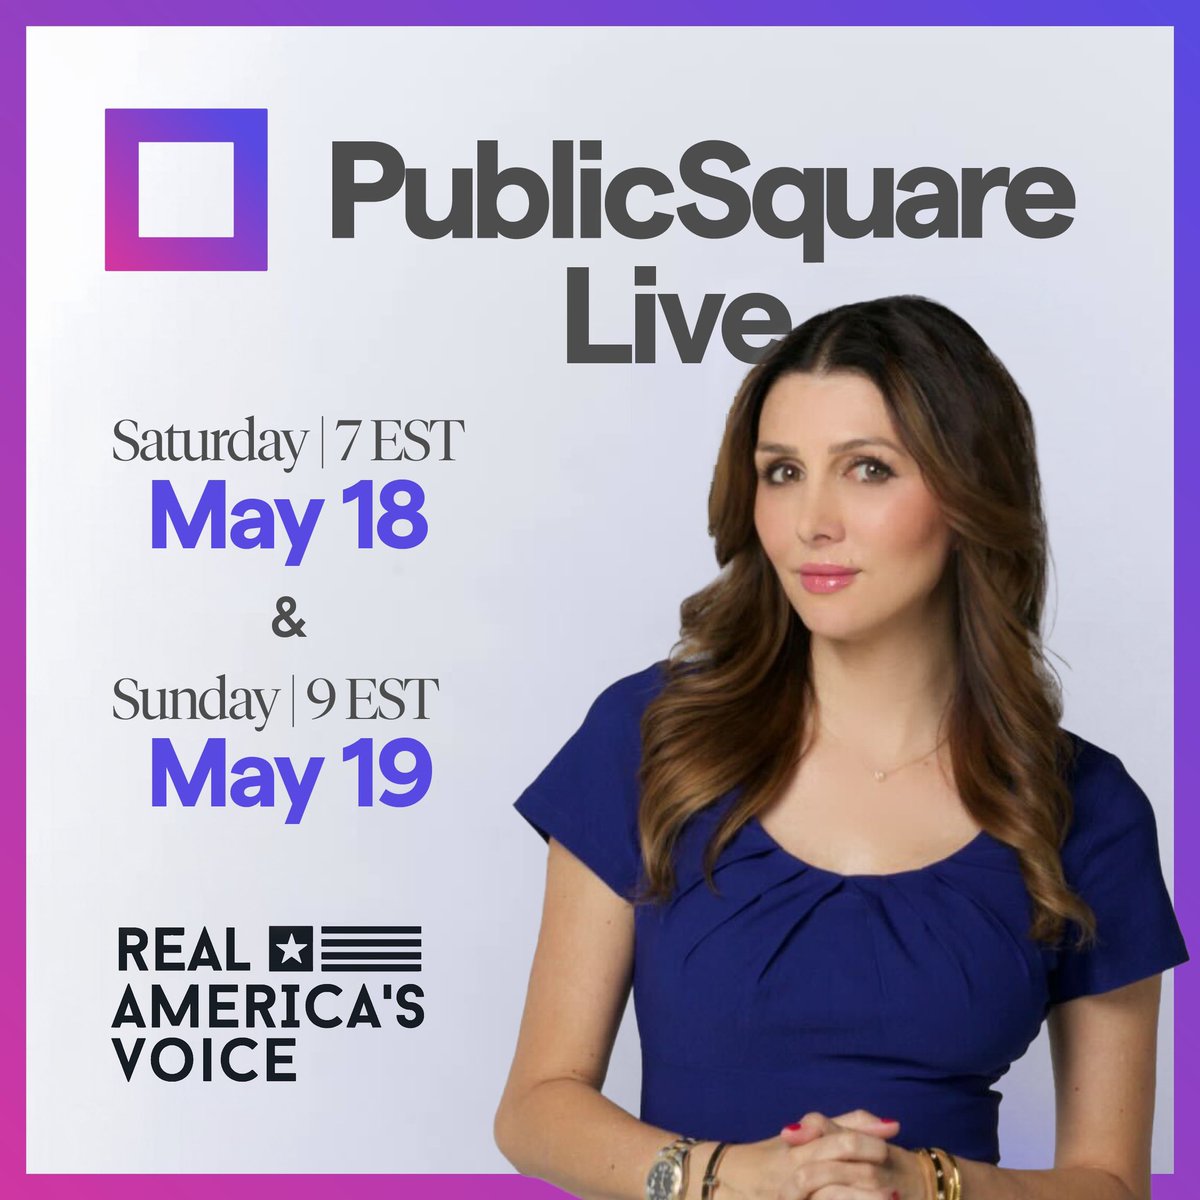 Don’t miss it! Catch PublicSquare Live with @ErinElmore today and tomorrow to hear about our favorite businesses this month! rumble.com/v4vzfl5-public…